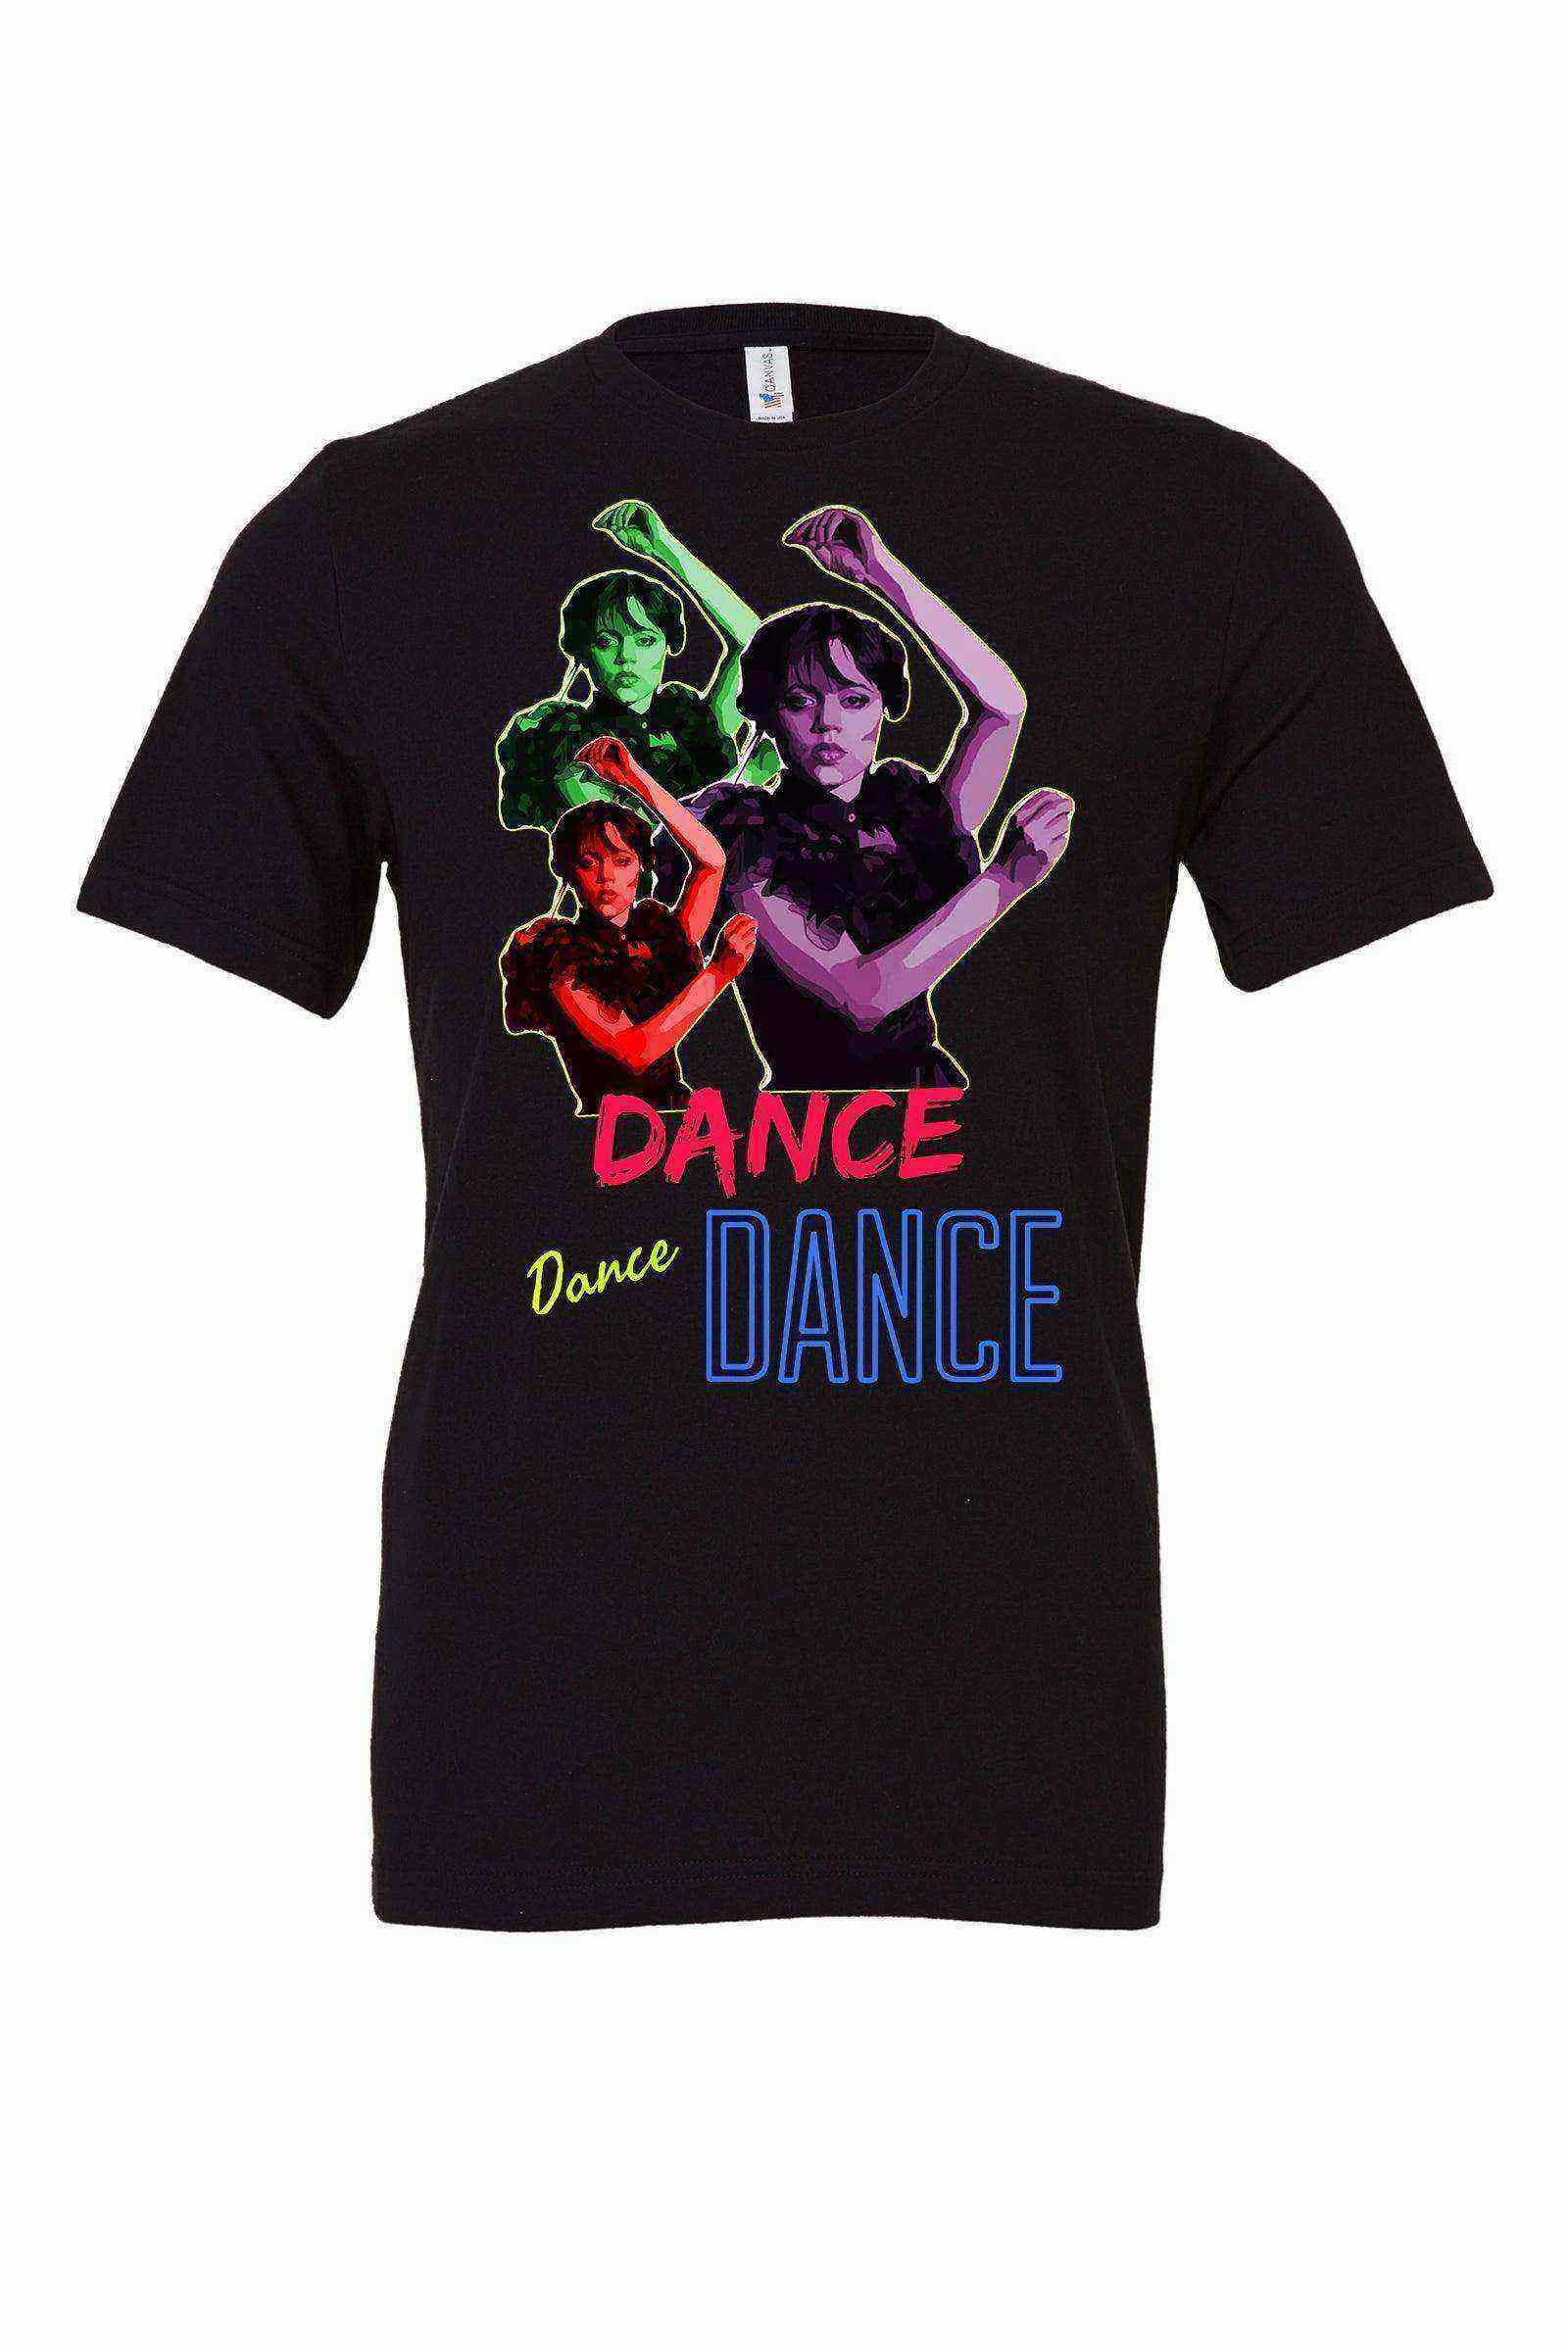 Toddler | Wednesday Dance With My Hands Shirt | Addams Family | Wednesday Shirt - Dylan's Tees